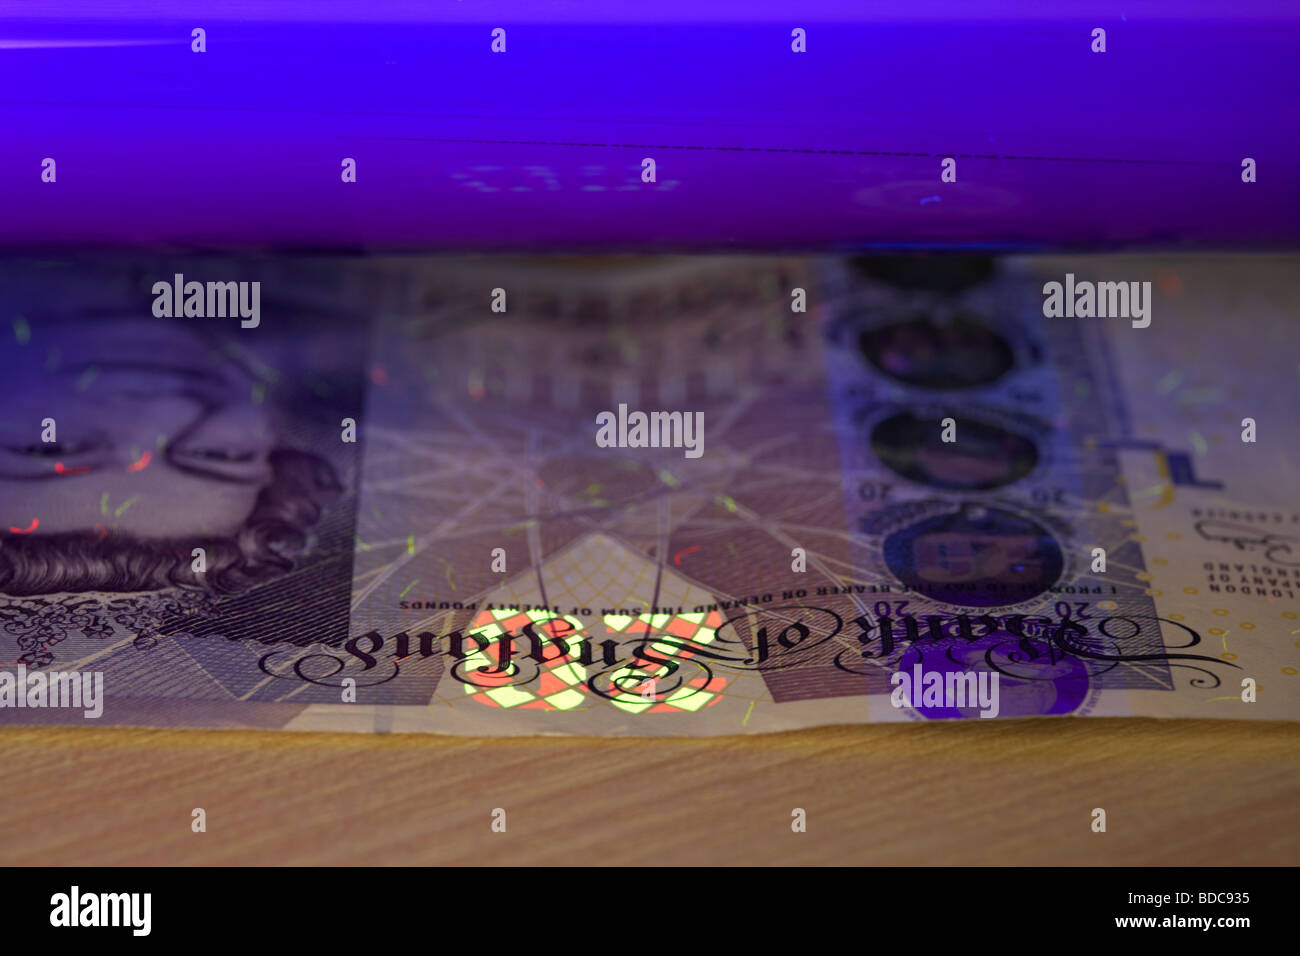 using an ultra violet black light to check a twenty pound note bank of england banknote to verify that it is genuine Stock Photo